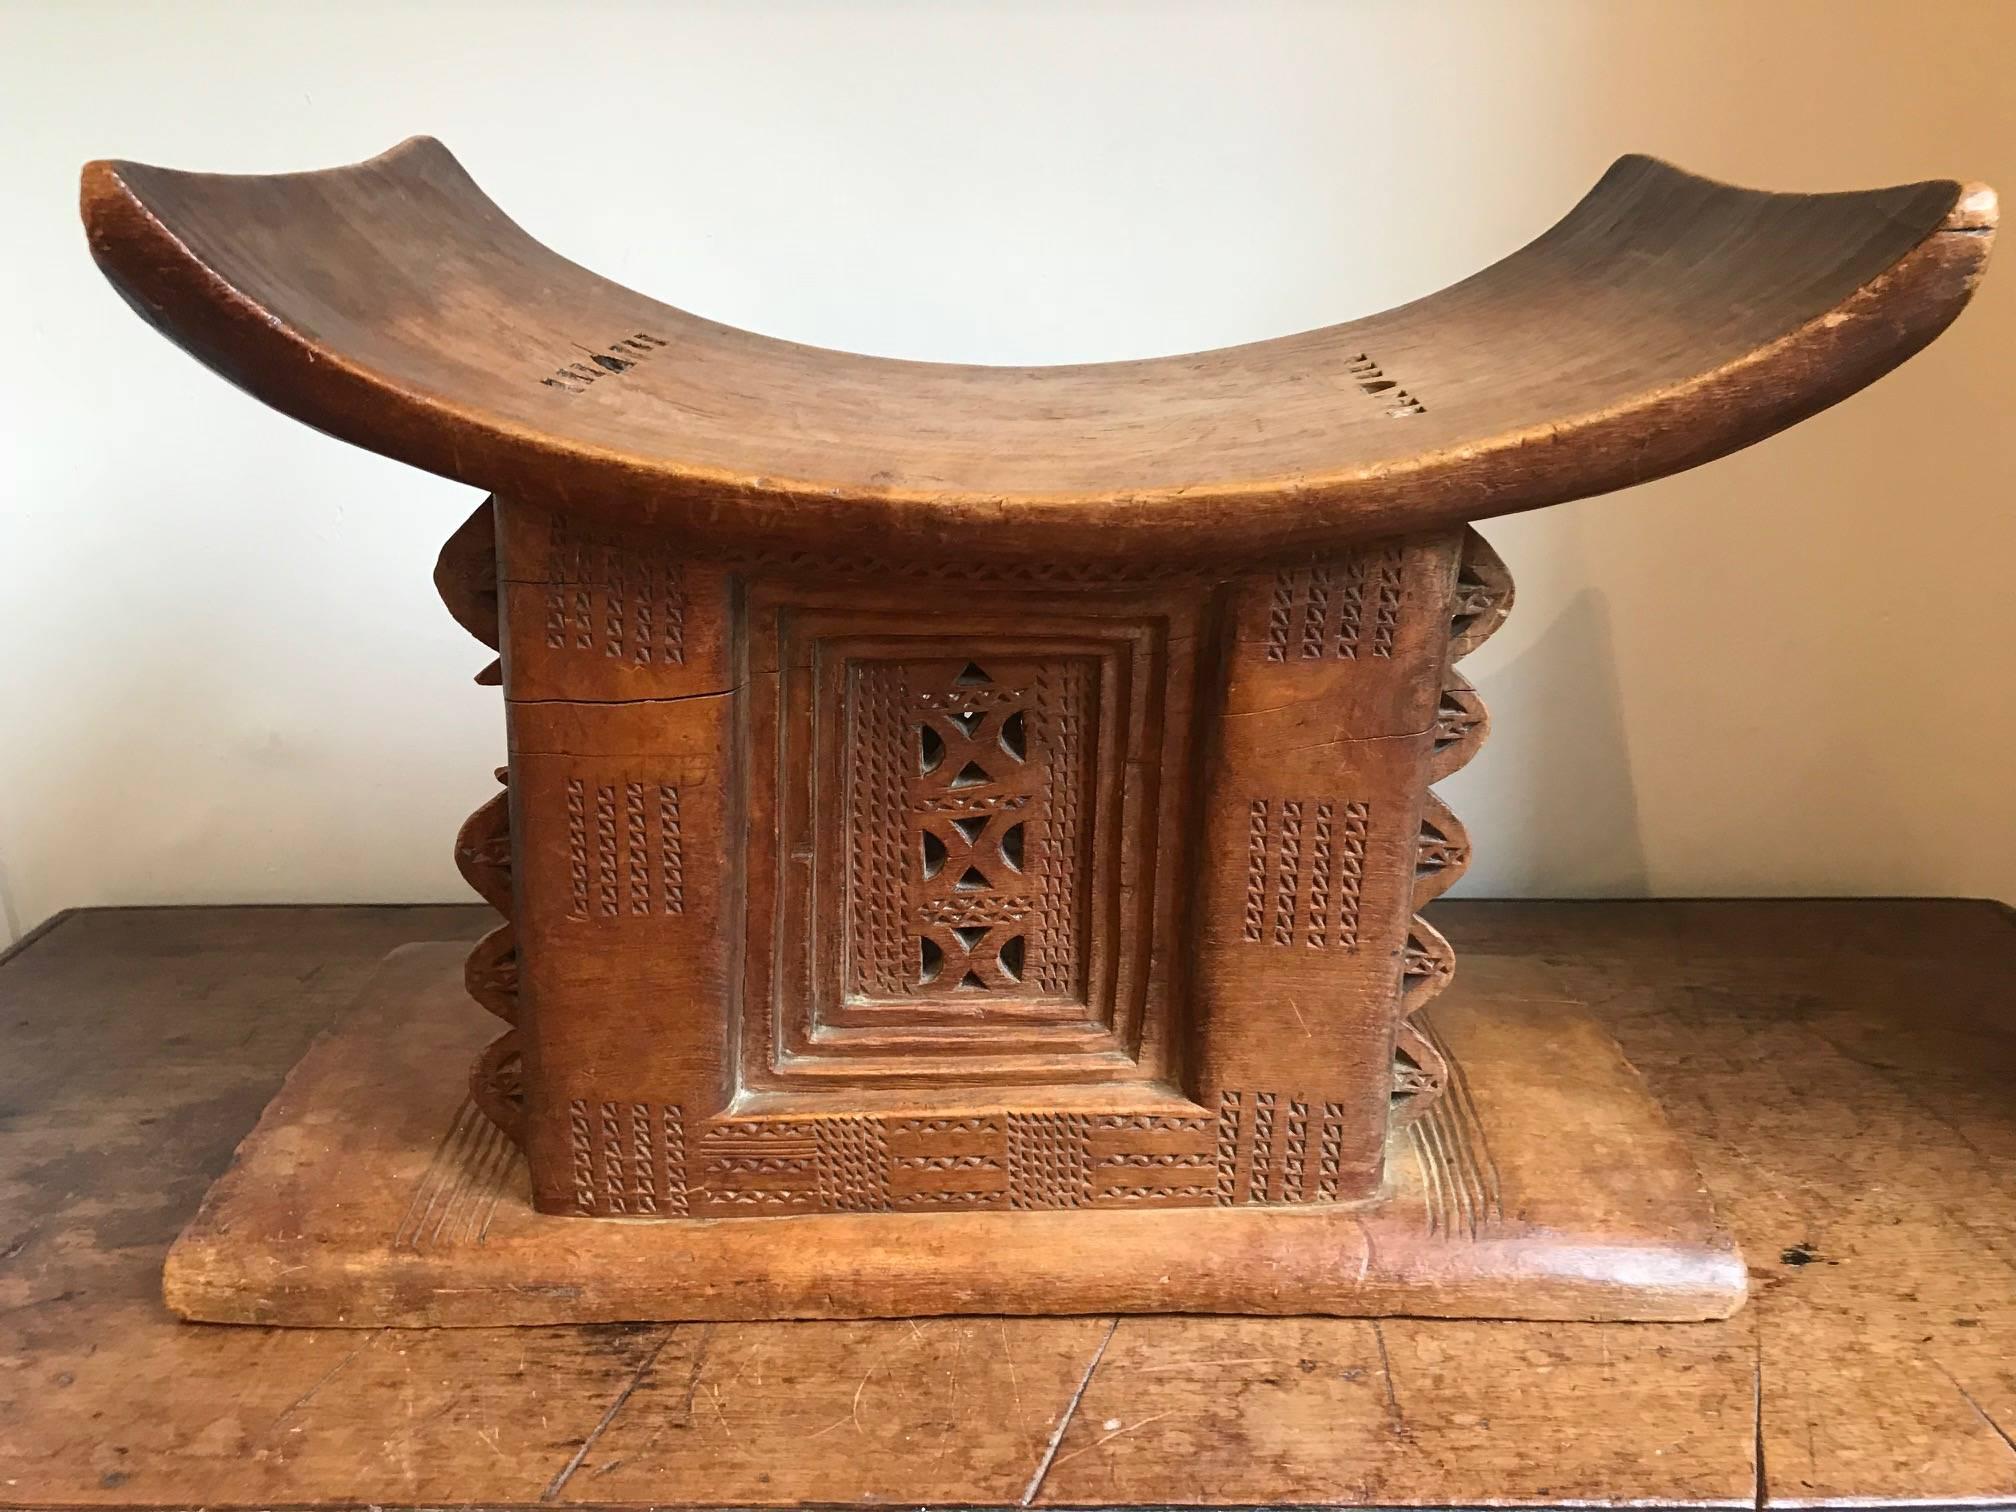 A good example of an early to mid-20th century Ashanti or Asante Tribal stool used by the Akua Ba tribe, with intricate carving. Some damage which is apparent in the photos. Has been well used with excellent patination. Strong can be used as a stool